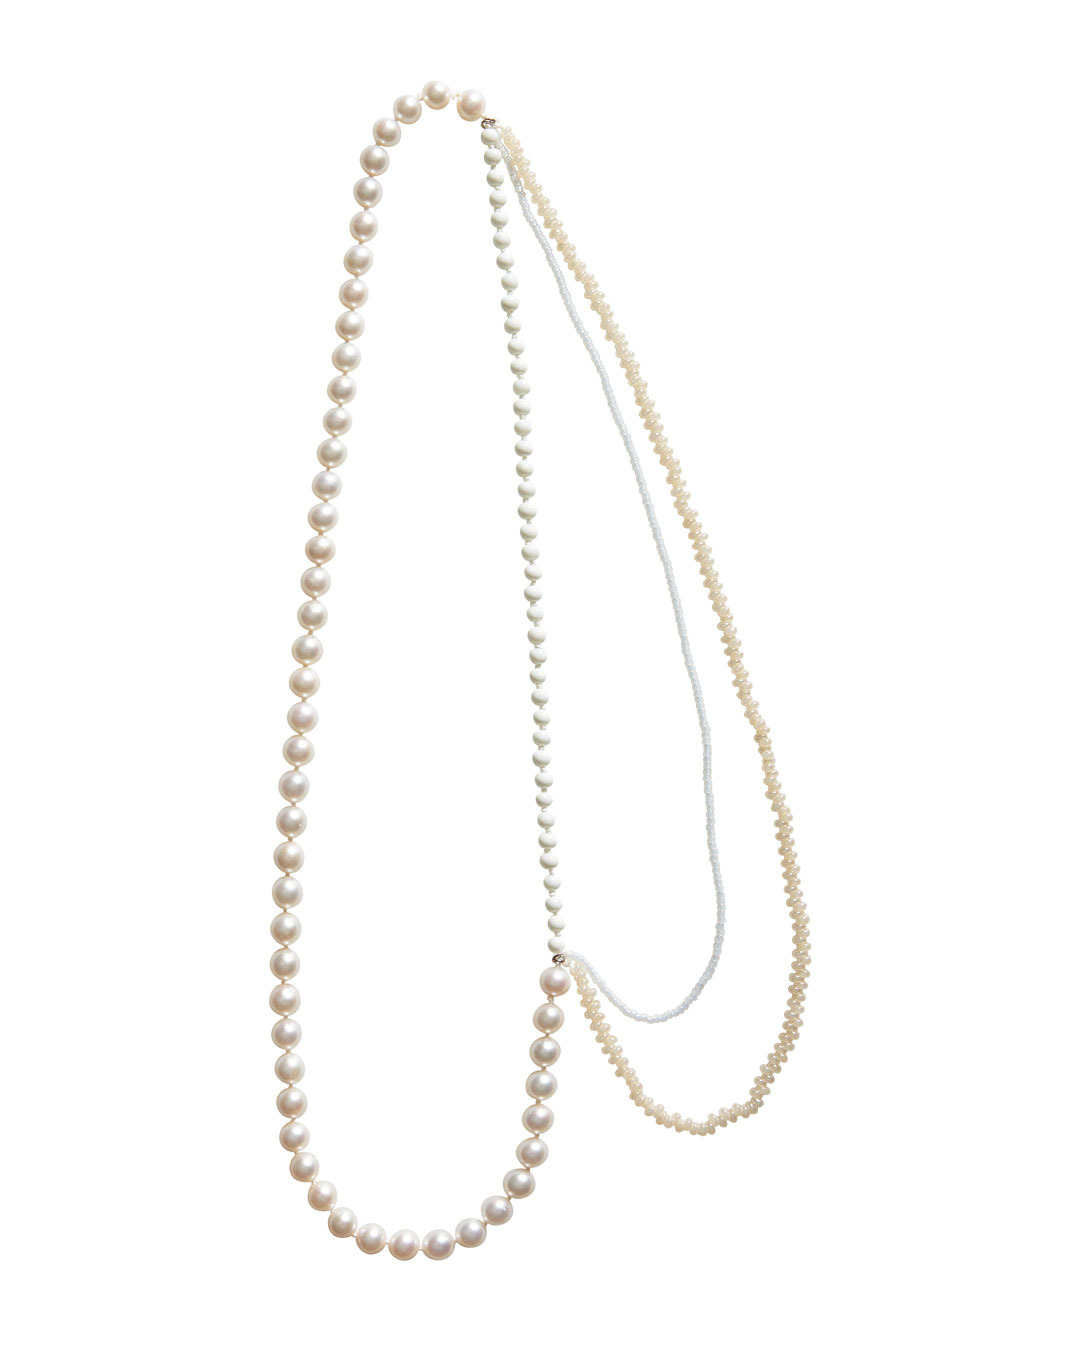 Annelies Planteijdt, Mooie stad - Witte water (Beautiful City - White Water), 2020, necklace; freshwater pearls, porcelain, Japanese glass beads, white gold, yarn, 630 mm, €1375